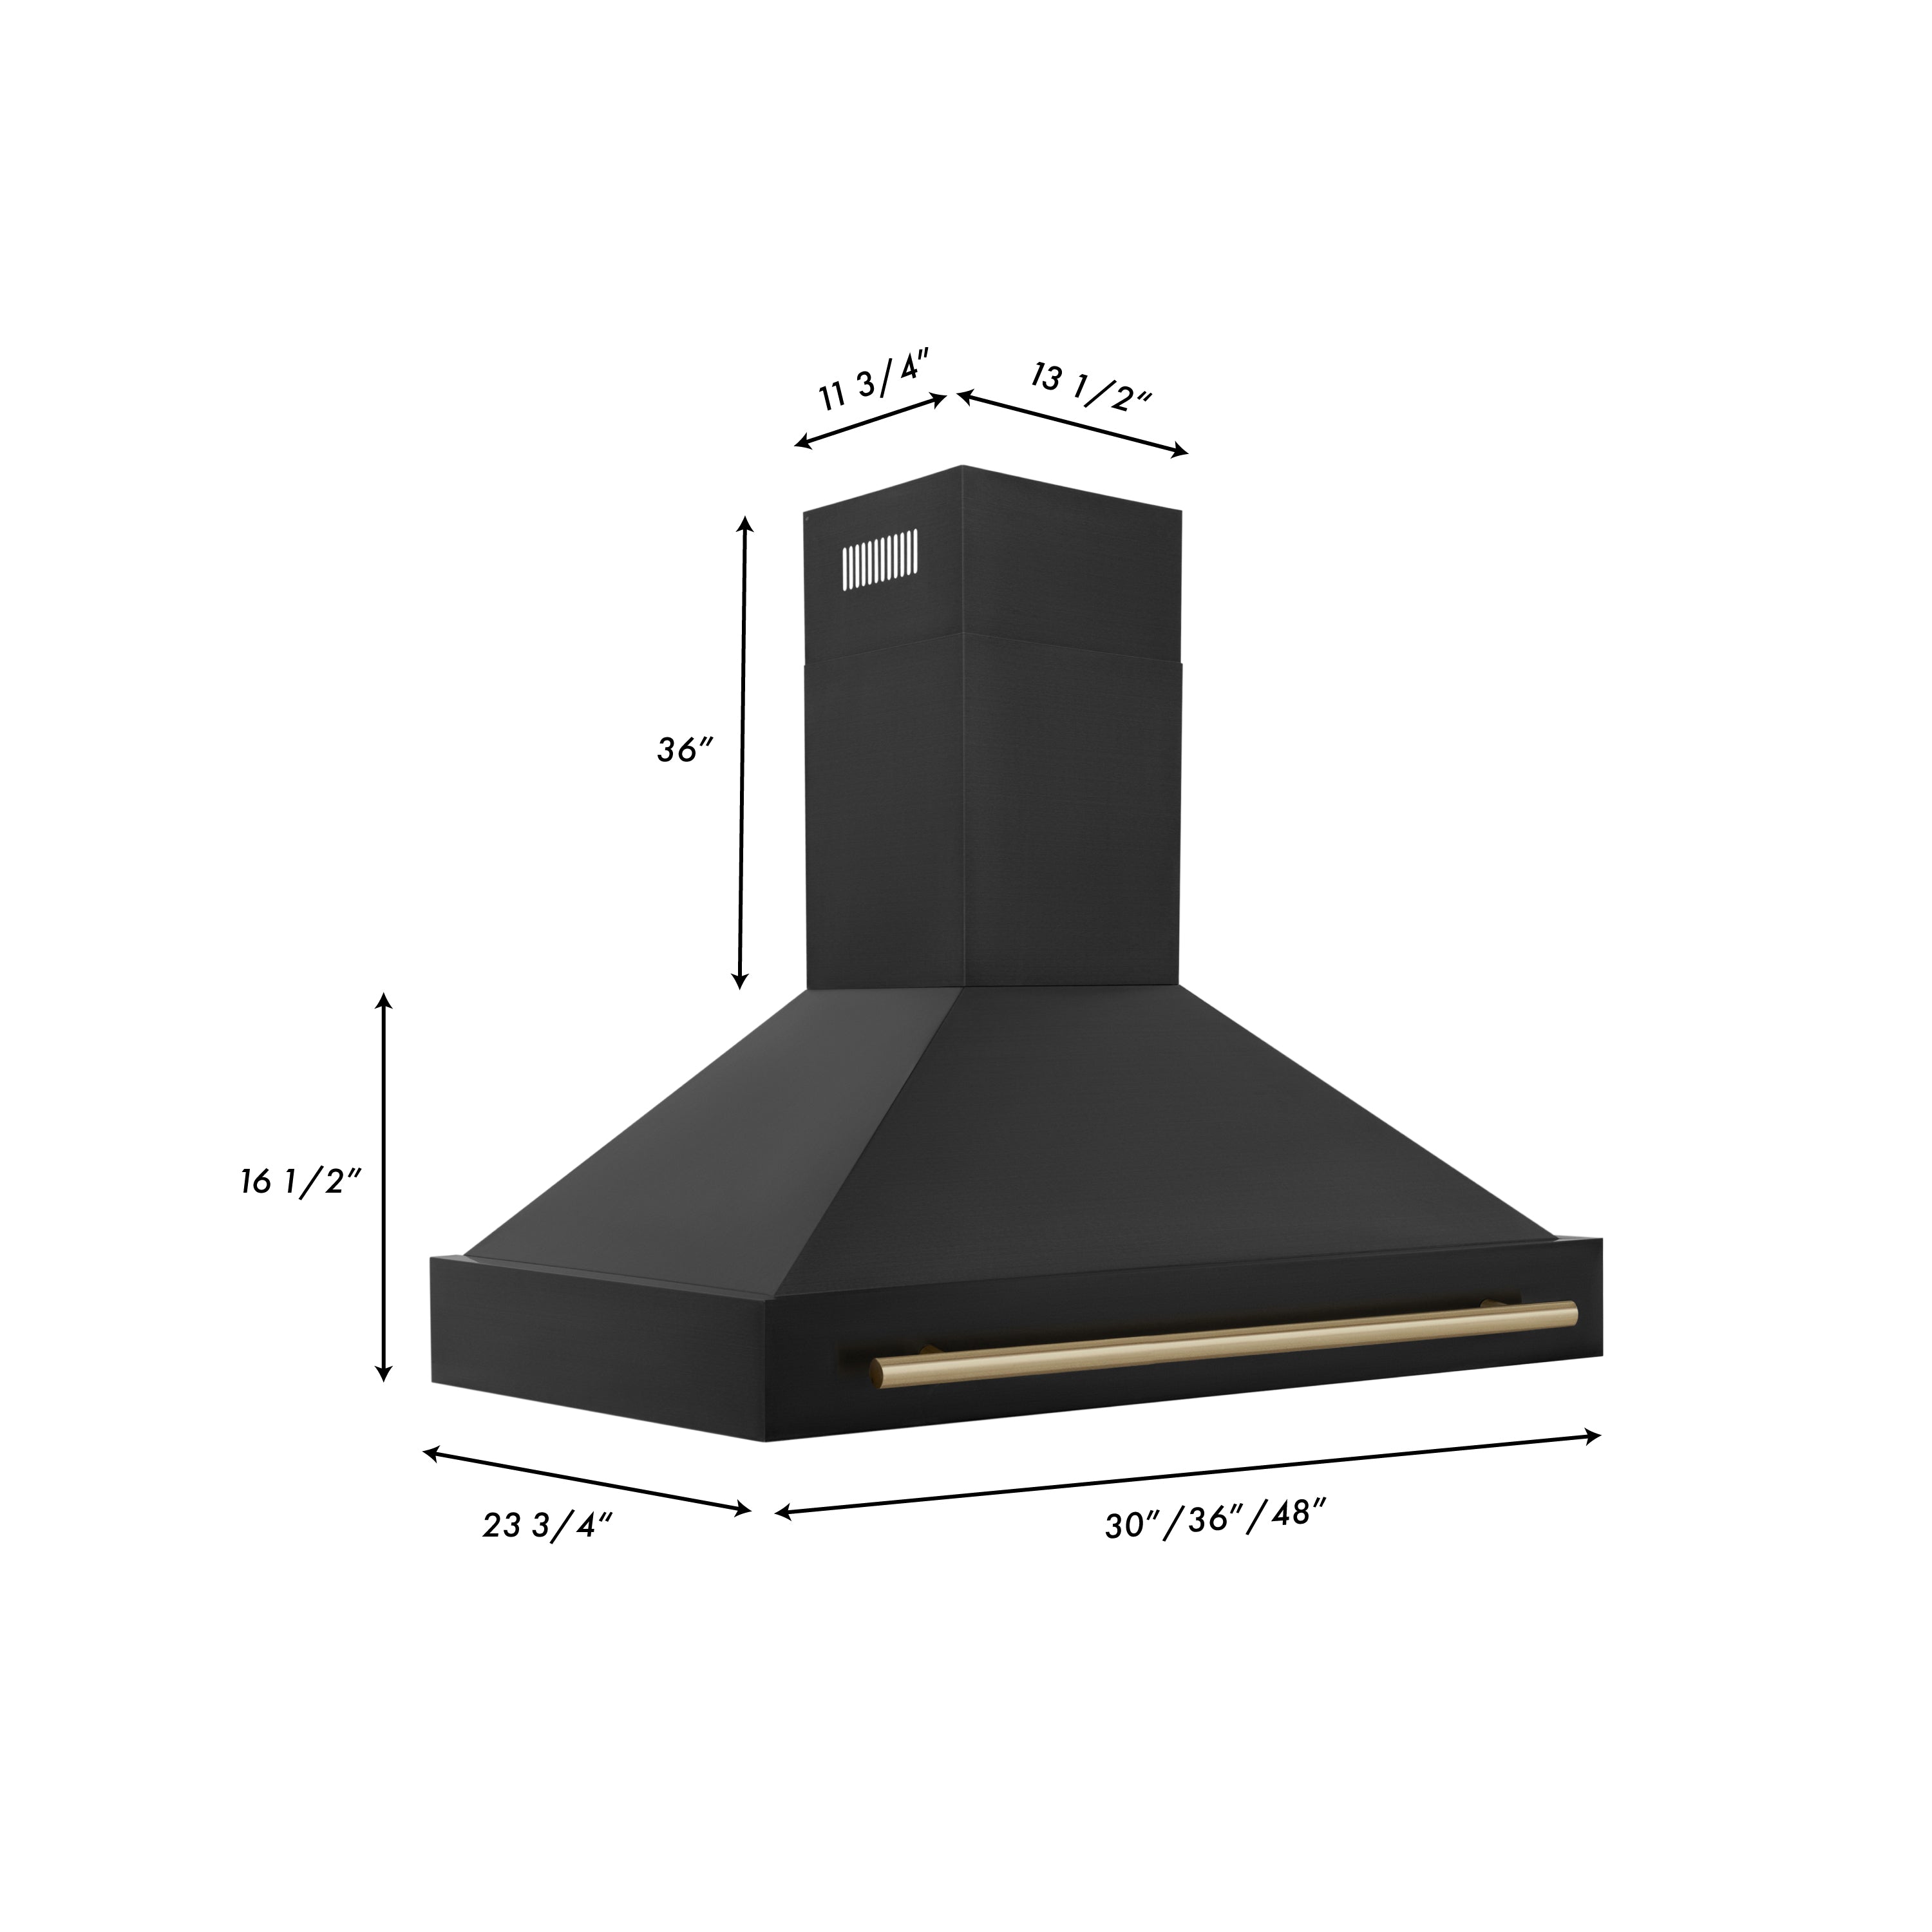 ZLINE Autograph Edition 48 in. Kitchen Package with Black Stainless Steel Dual Fuel Range and Range Hood with Champagne Bronze Accents (2AKP-RABRH48-CB) dimensional diagram with measurements.